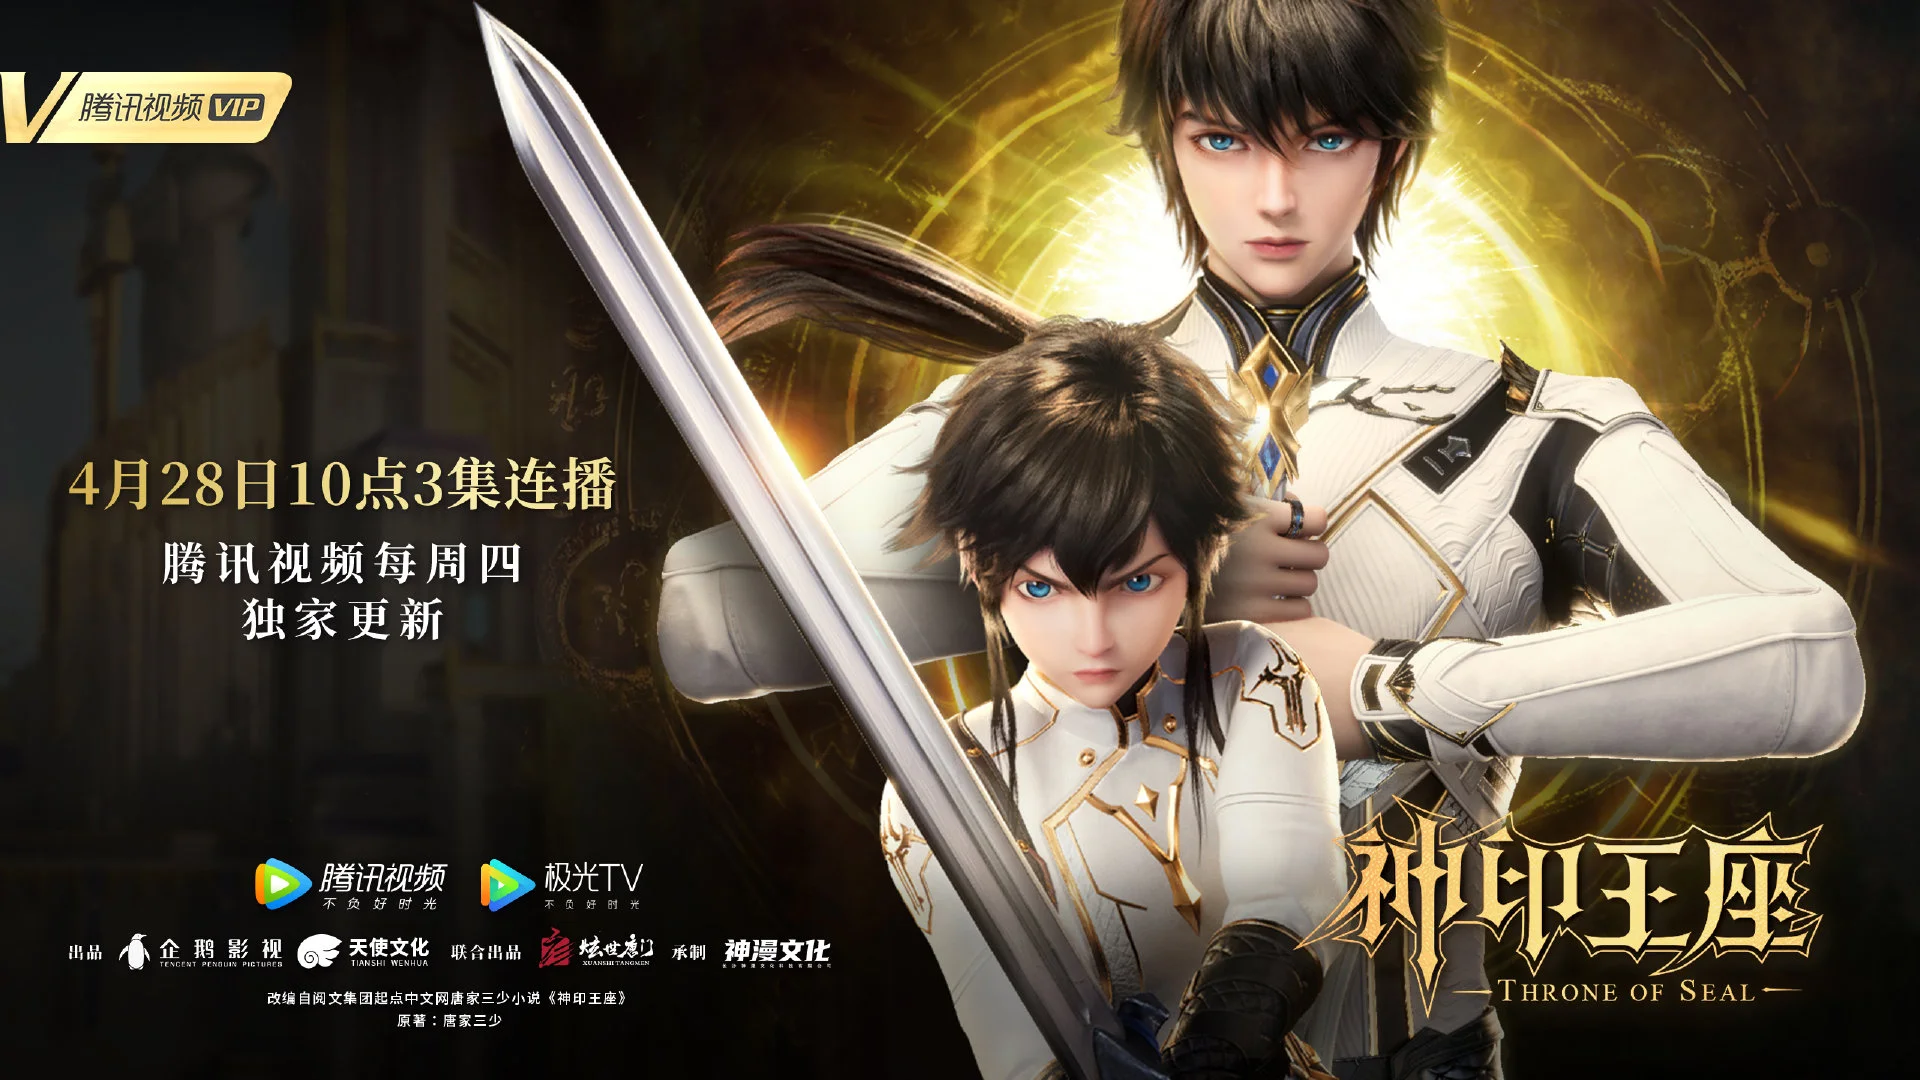 This is an Ongoing Chinese Anime